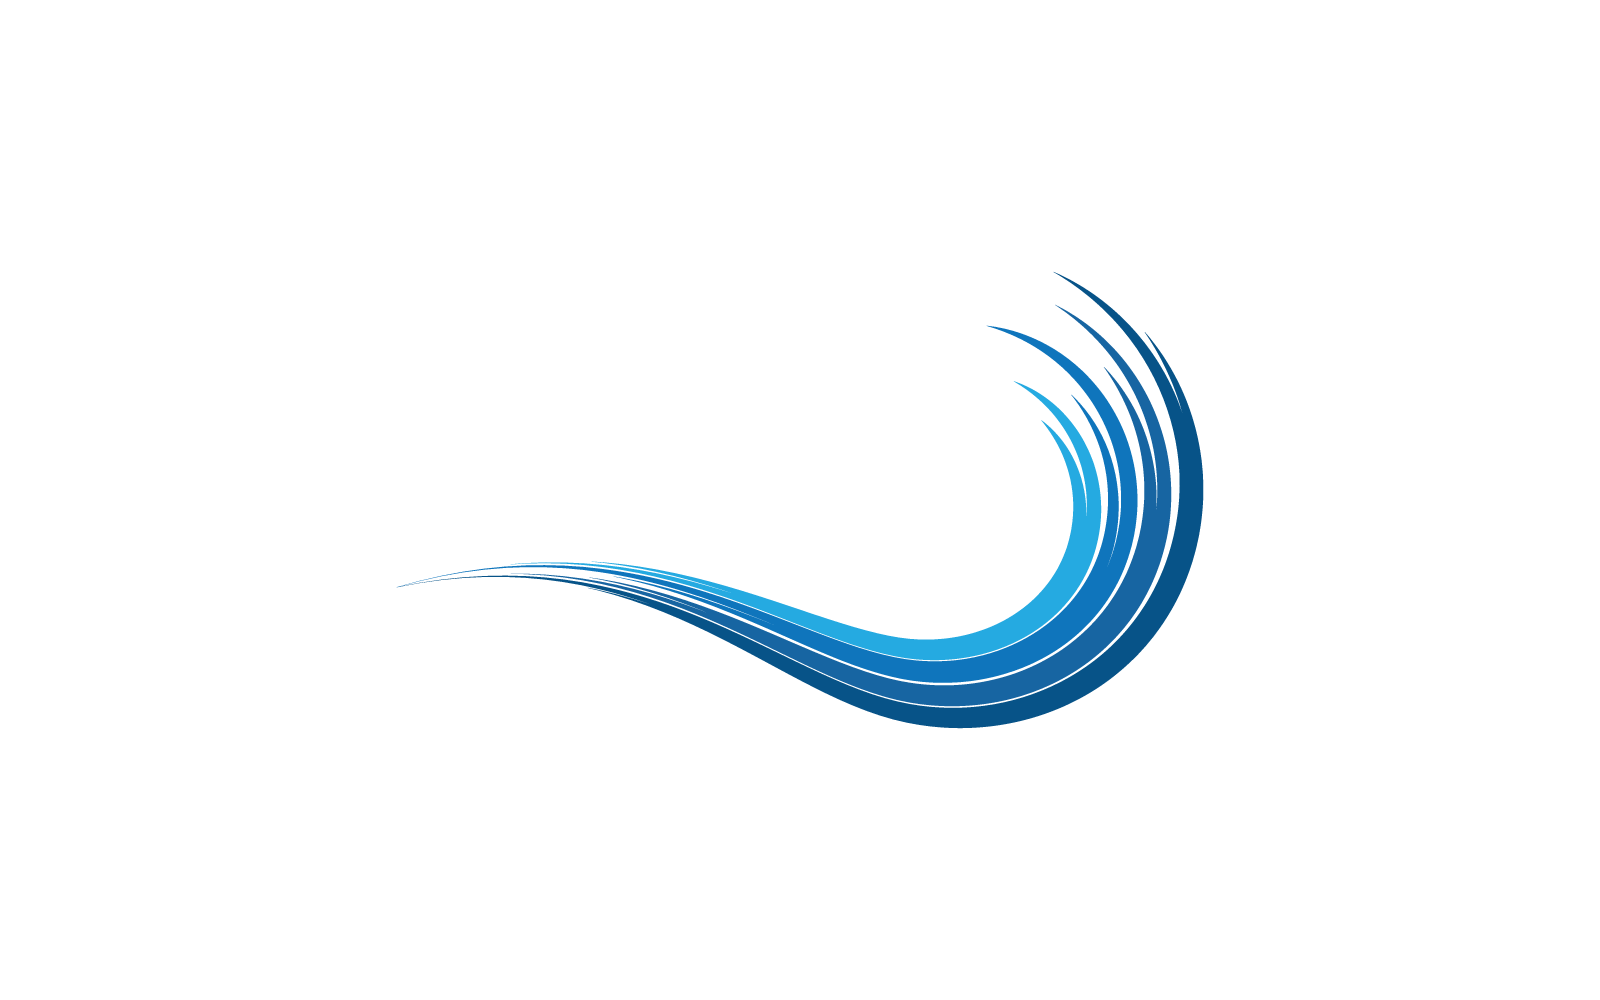 Water Wave logo illustration vector template